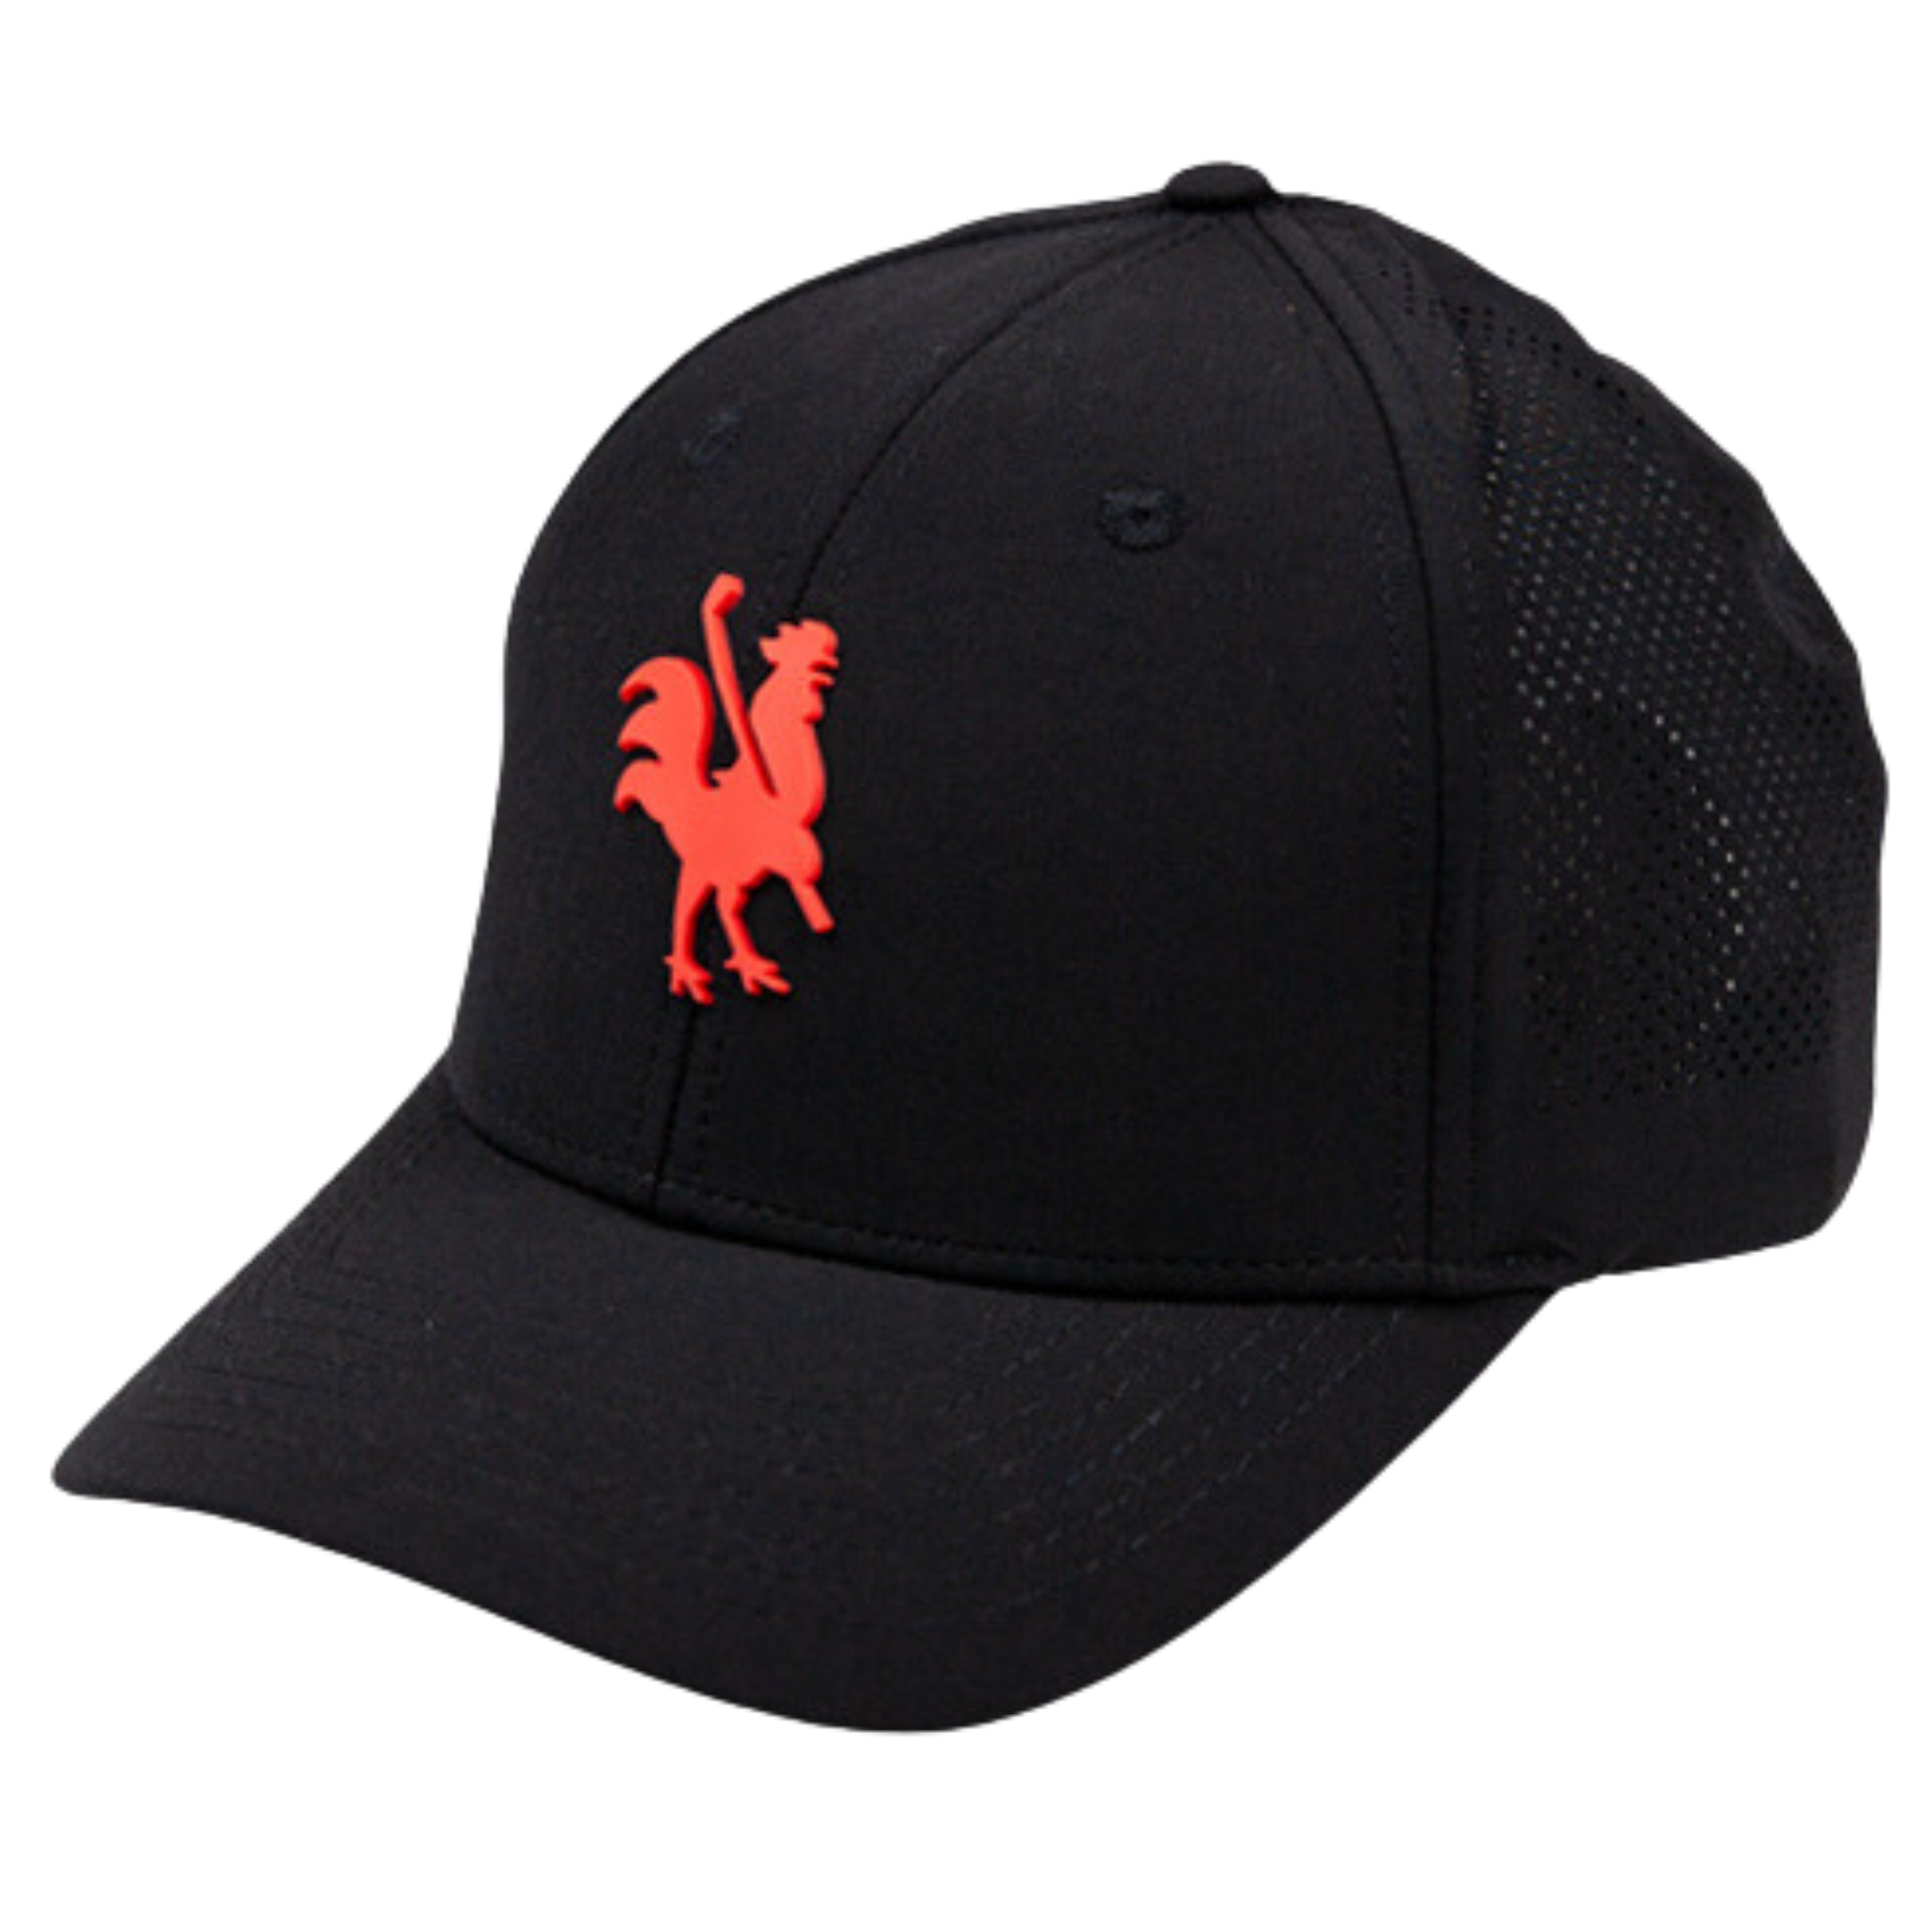 Apex black hat with red rooster logo